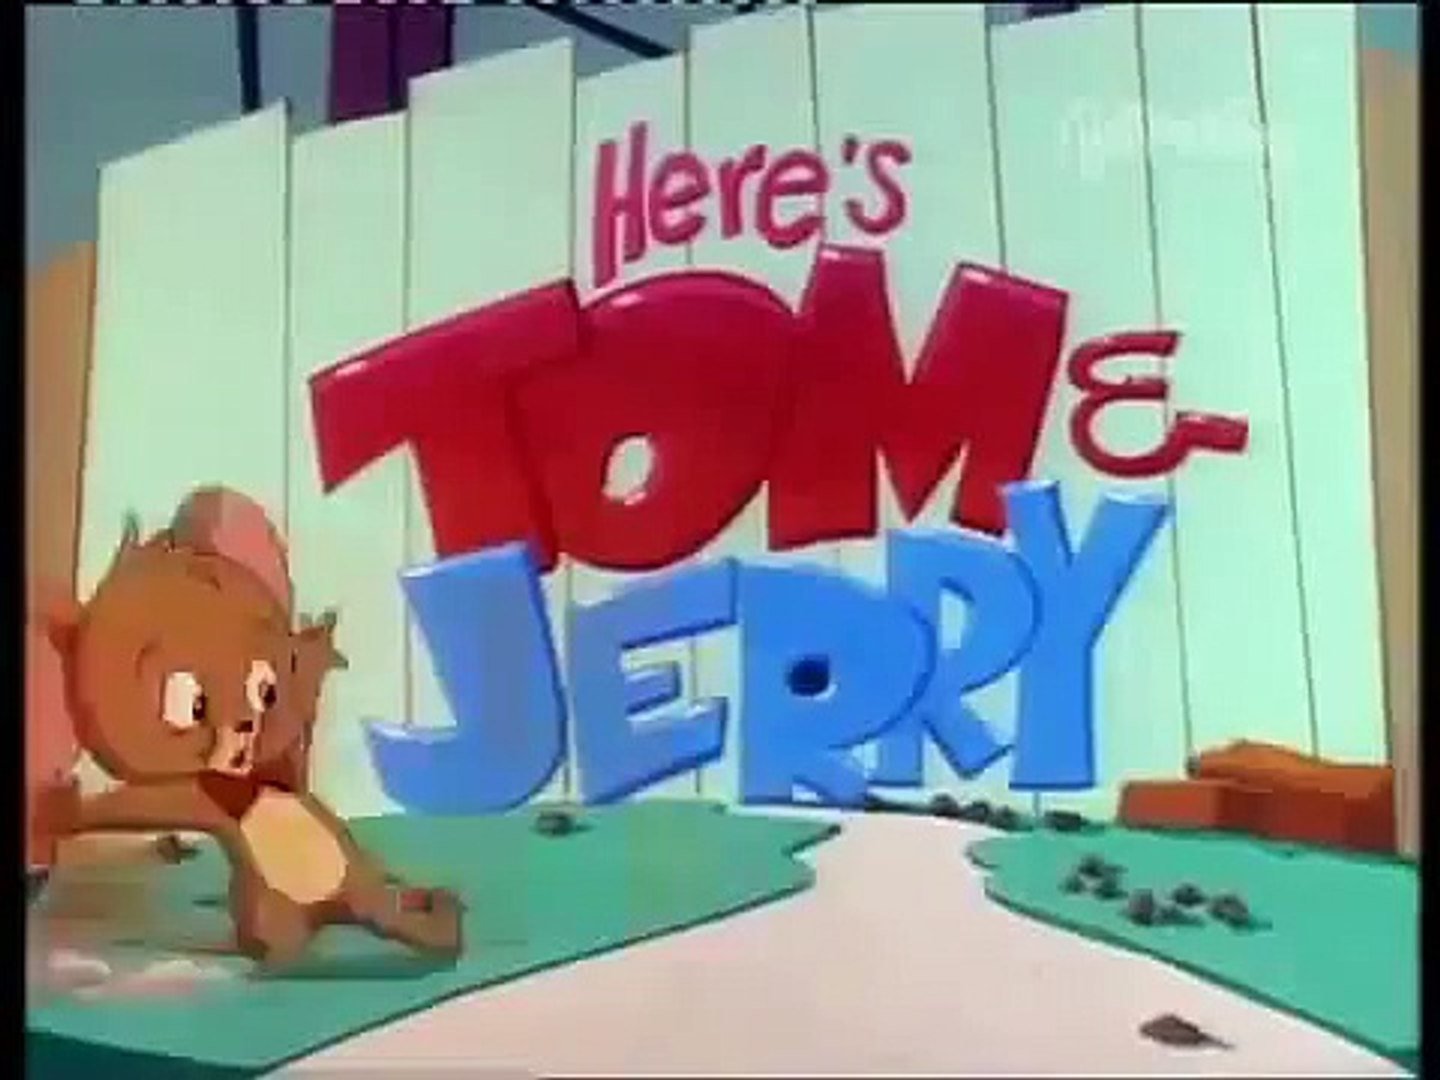 Tom and Jerry Kids 